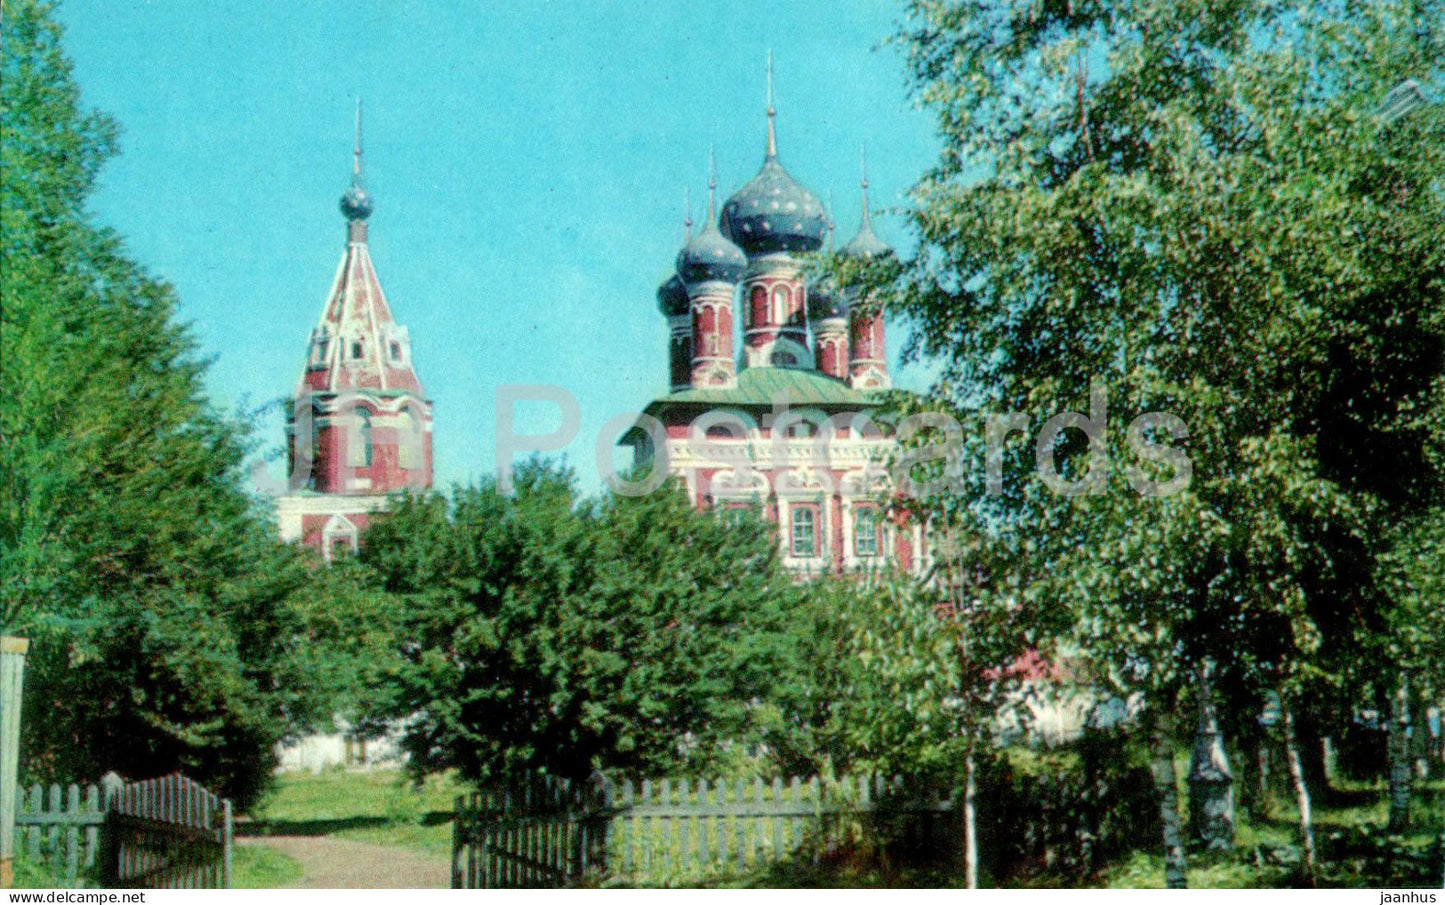 Uglich - Kremlin - Museum of Art and History - architectural monument - 1971 - Russia USSR - unused - JH Postcards